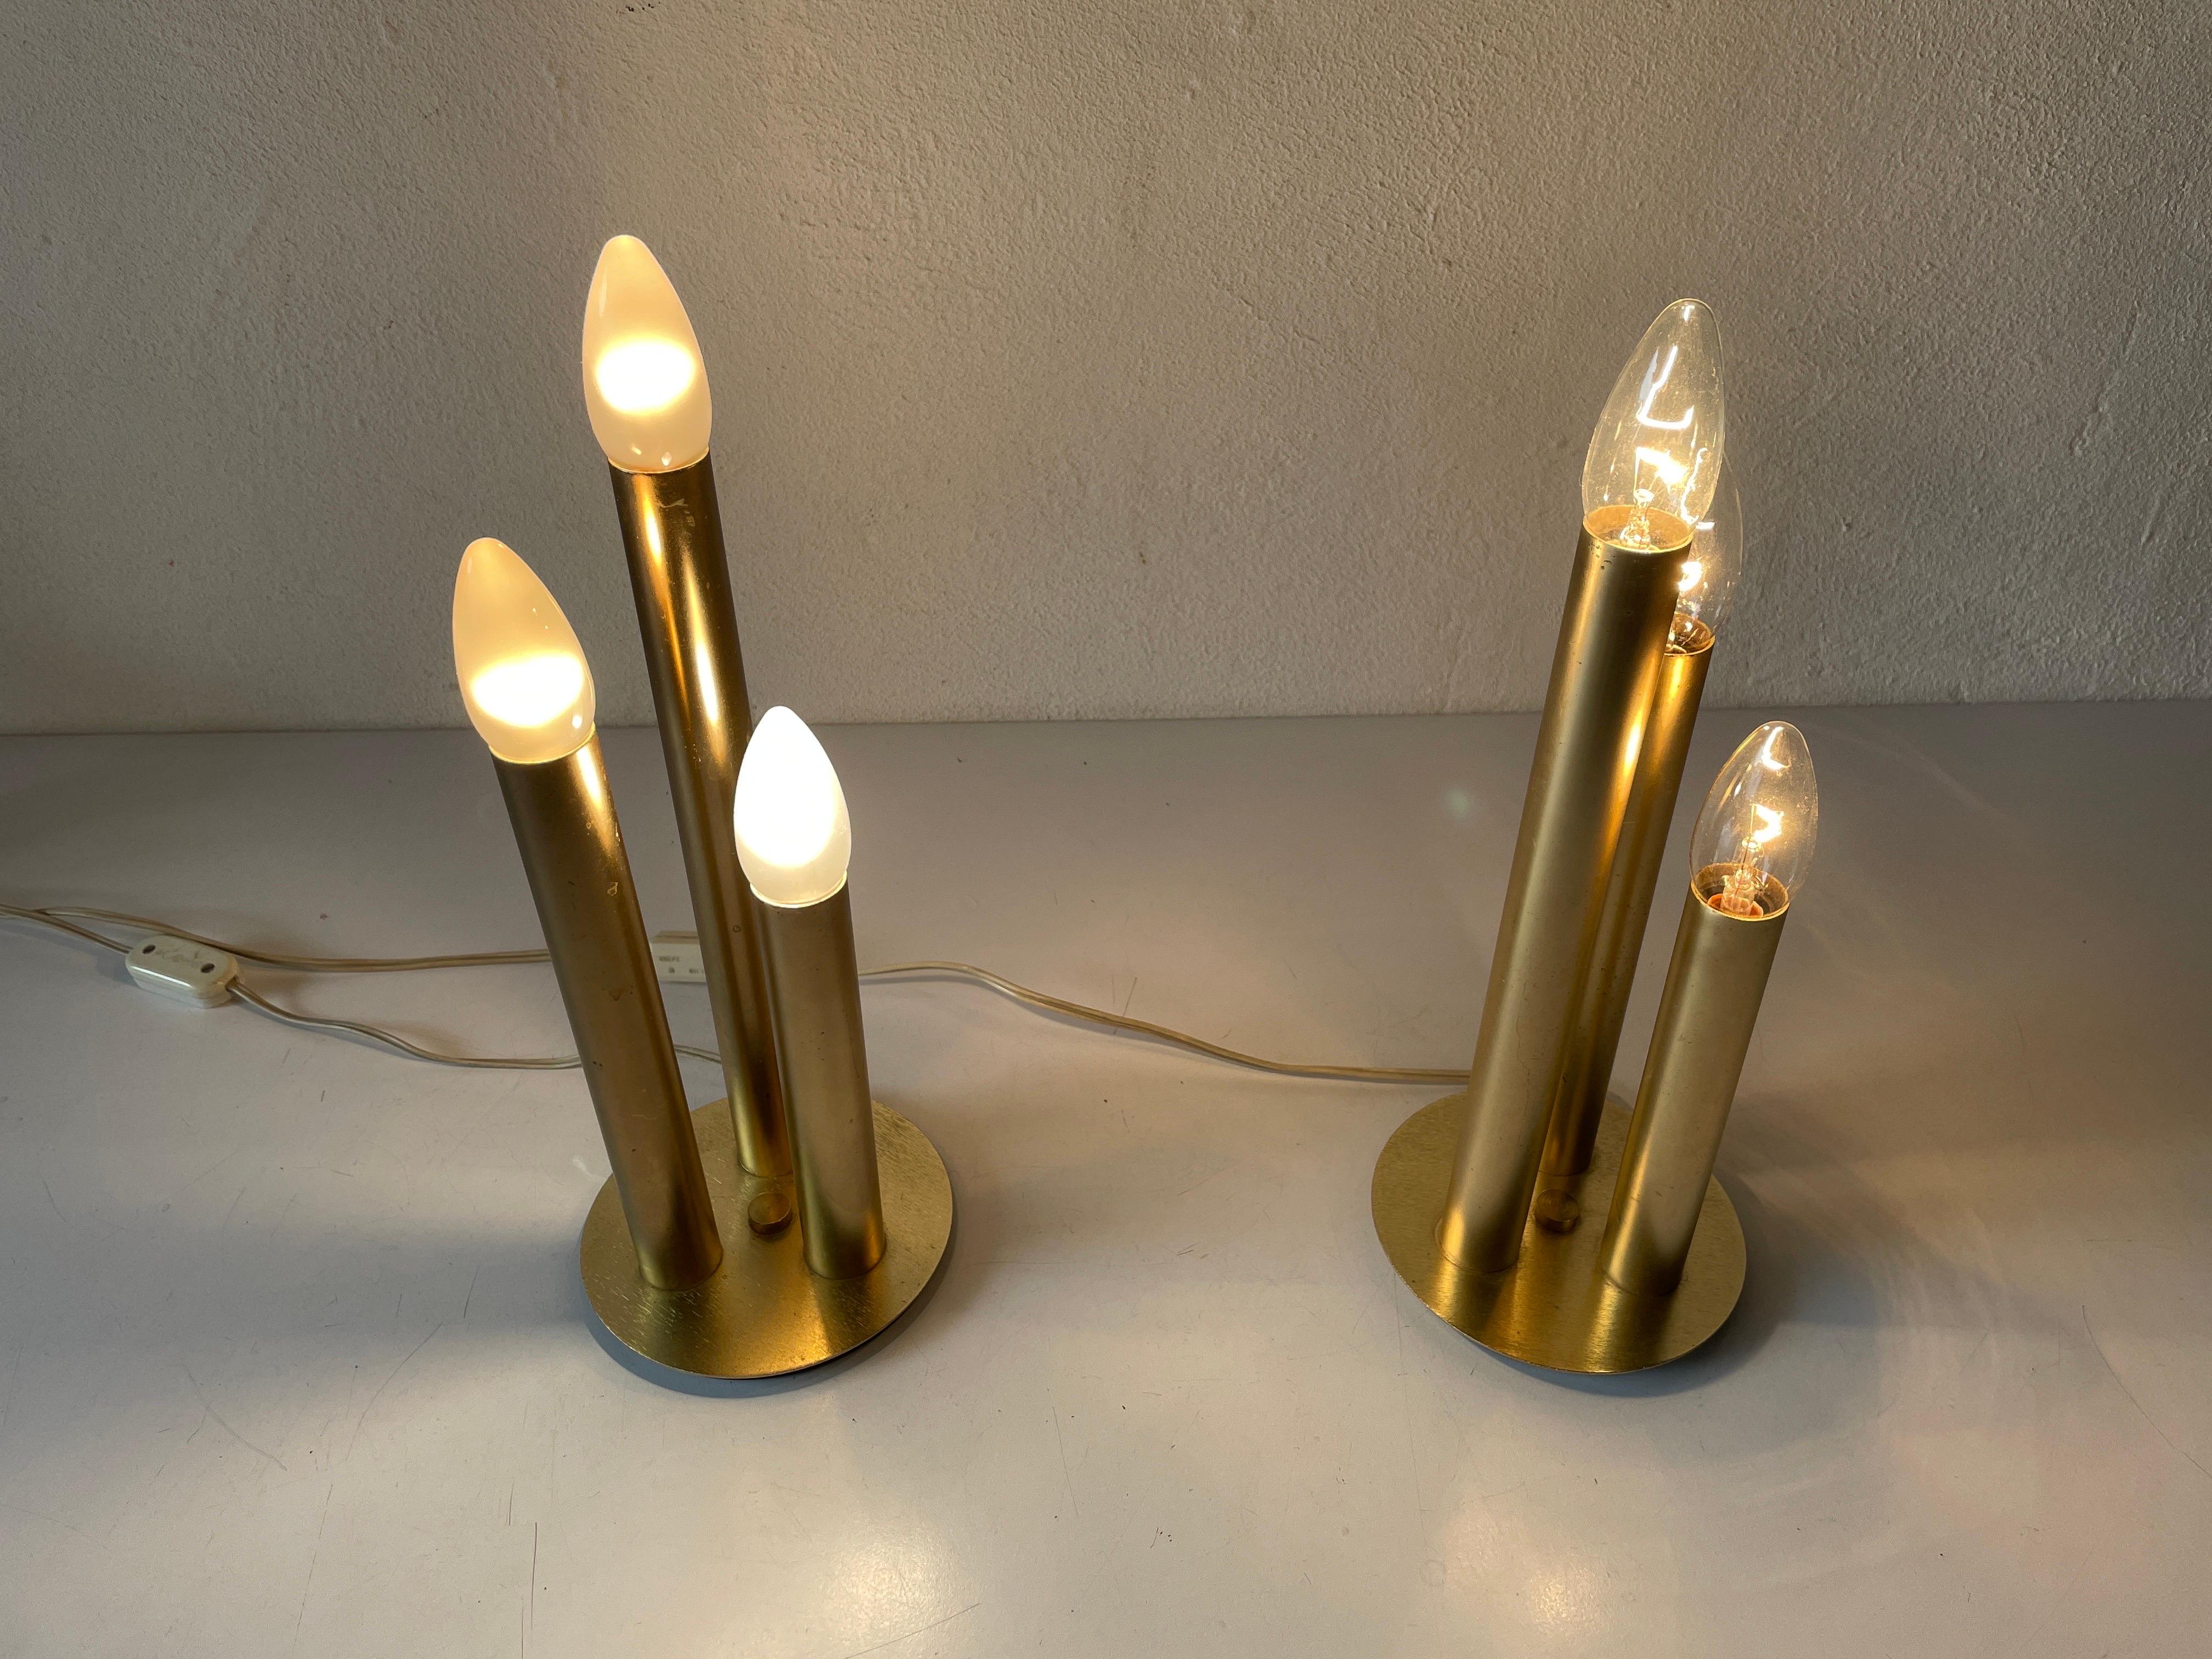 Brass 3 Cylinder Modernist Pair of Table Lamps, 1960s, Italy For Sale 5